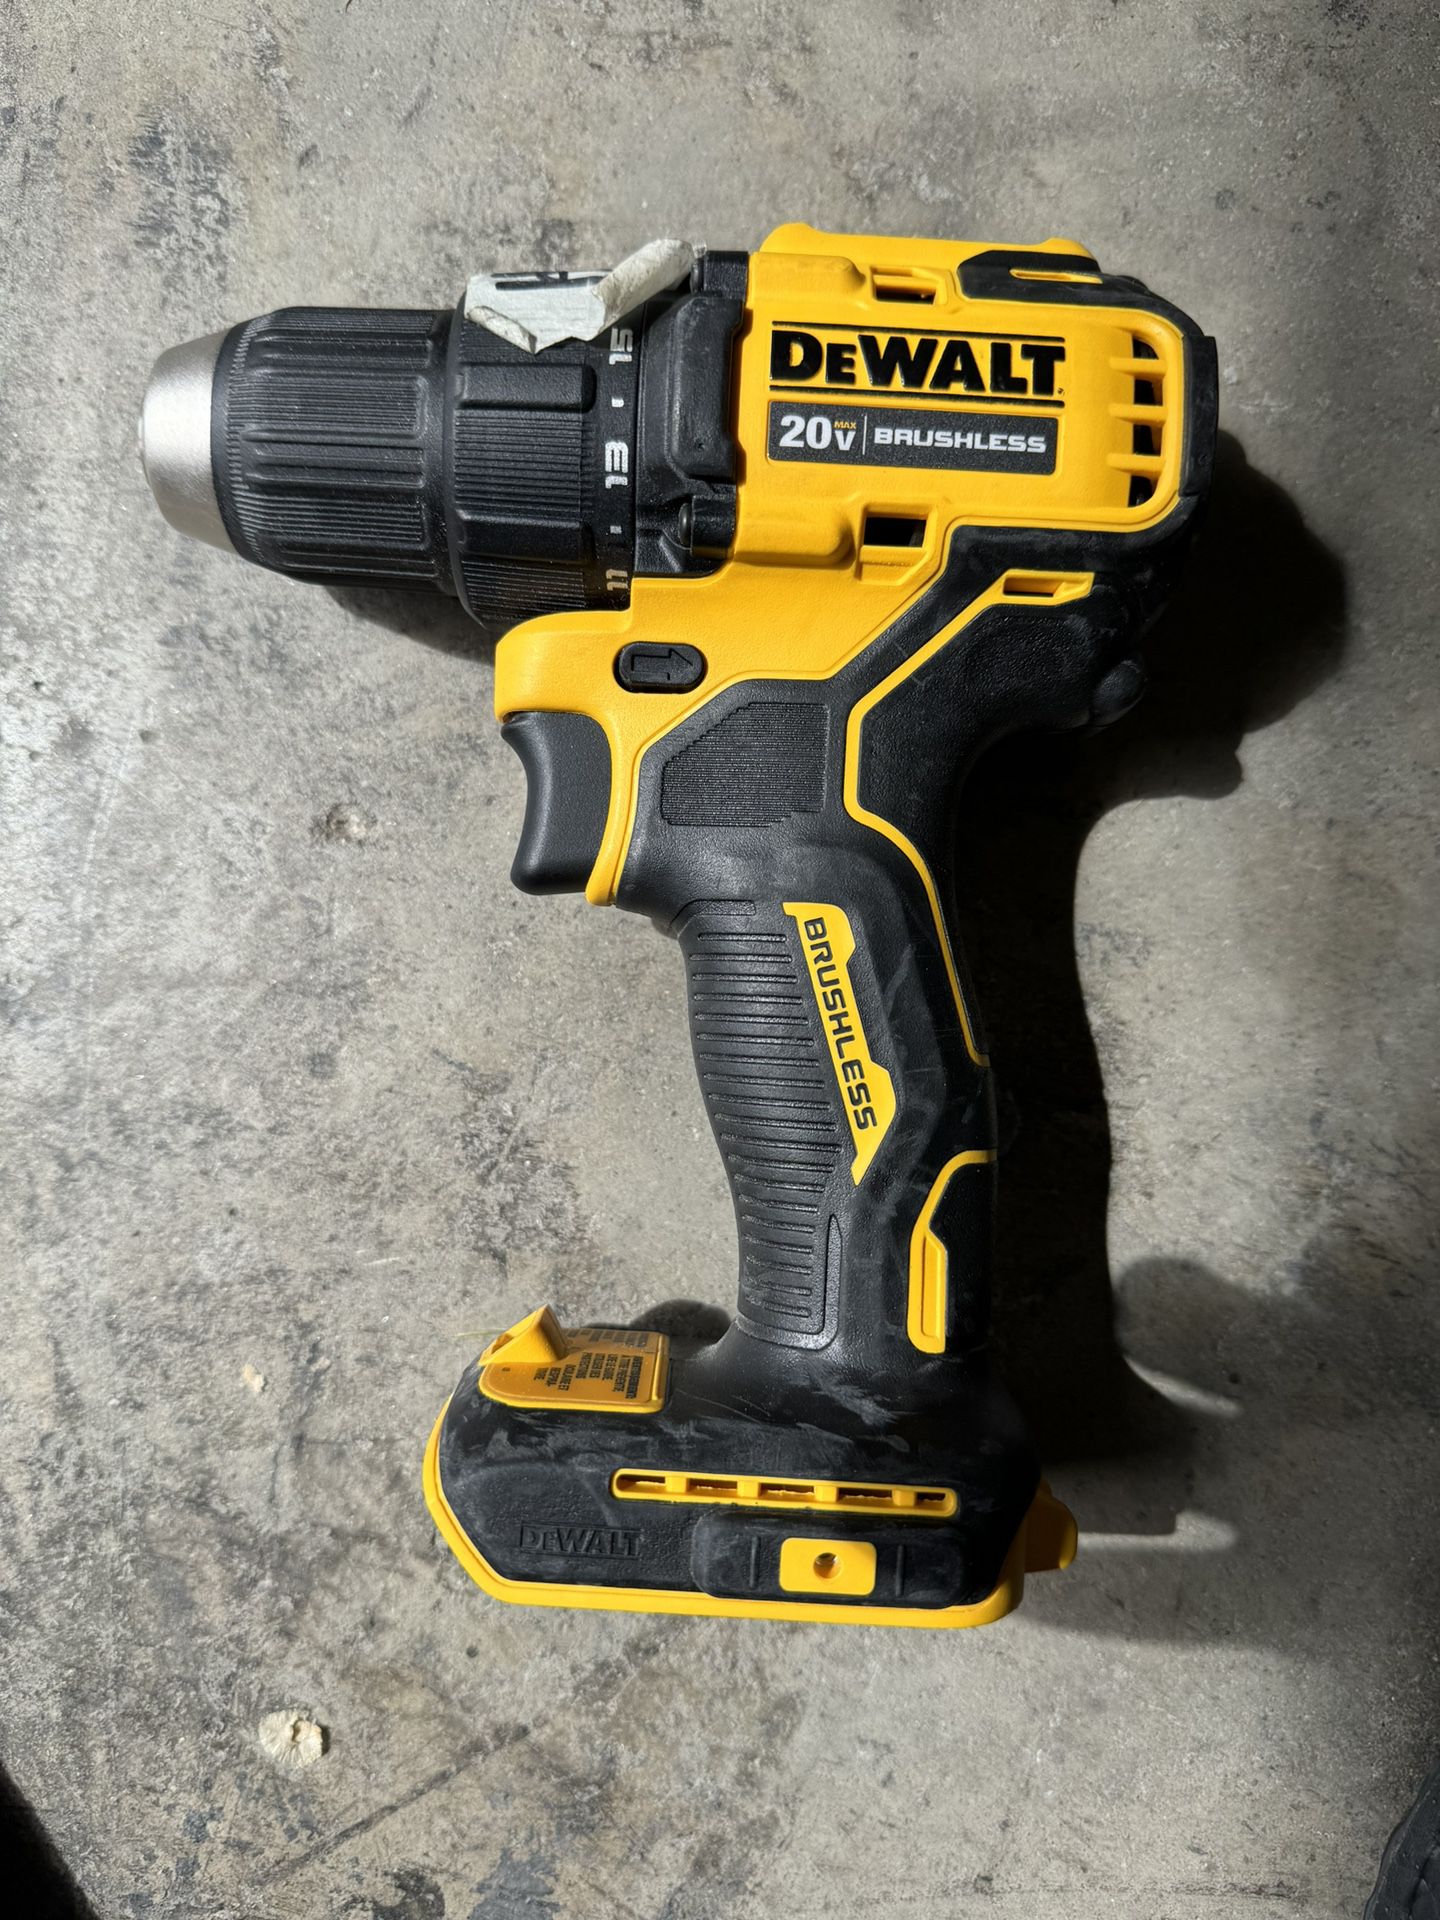 DEWALT ATOMIC 20V MAX Cordless Brushless Compact 1/2 in. Drill/Driver (Tool Only) $90